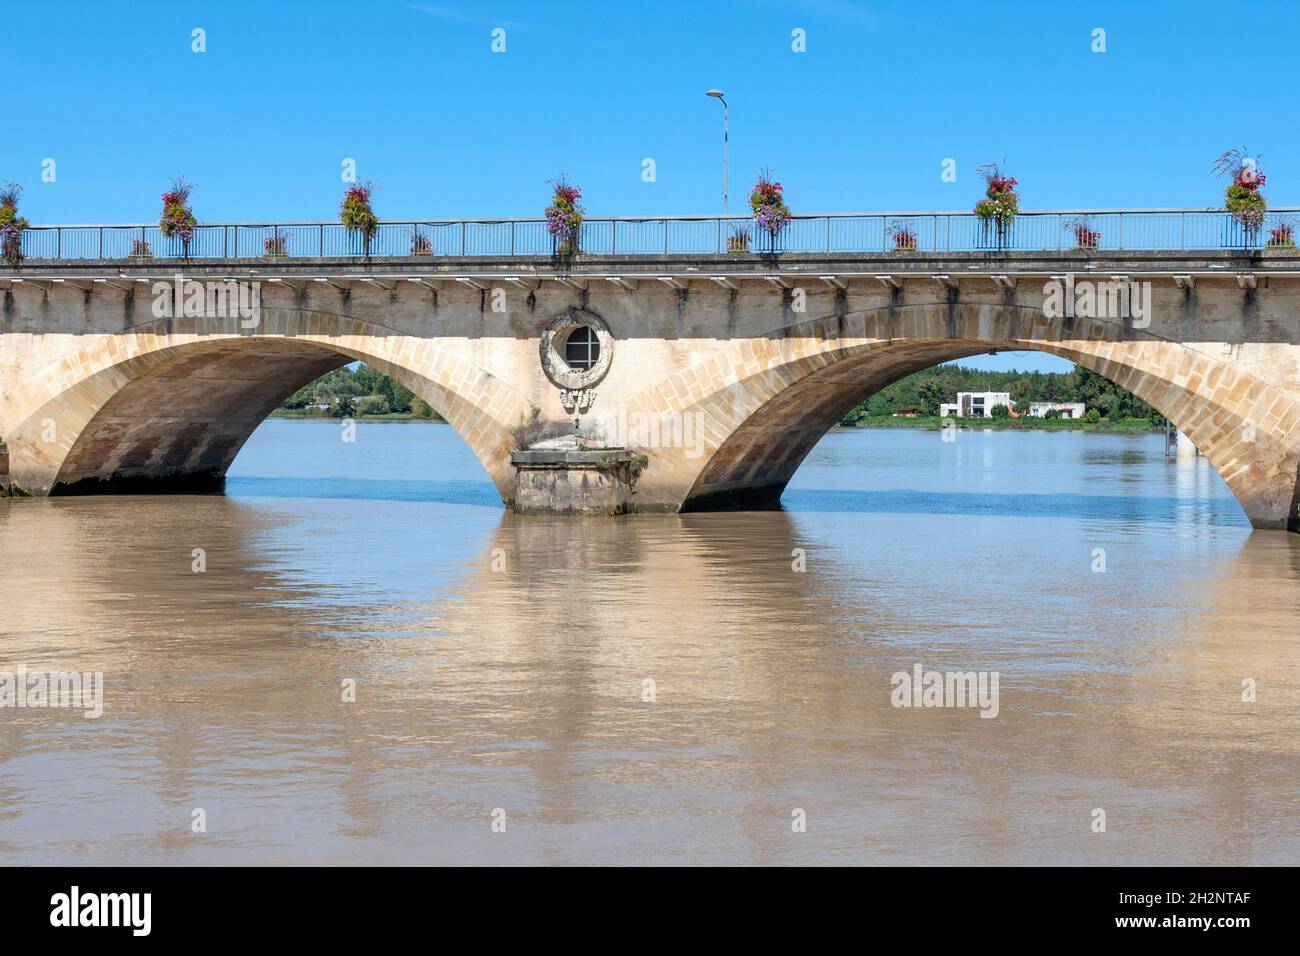 The arches of the stone bridge crossing the Dordogne river in Libourne, southern France Stock Photo